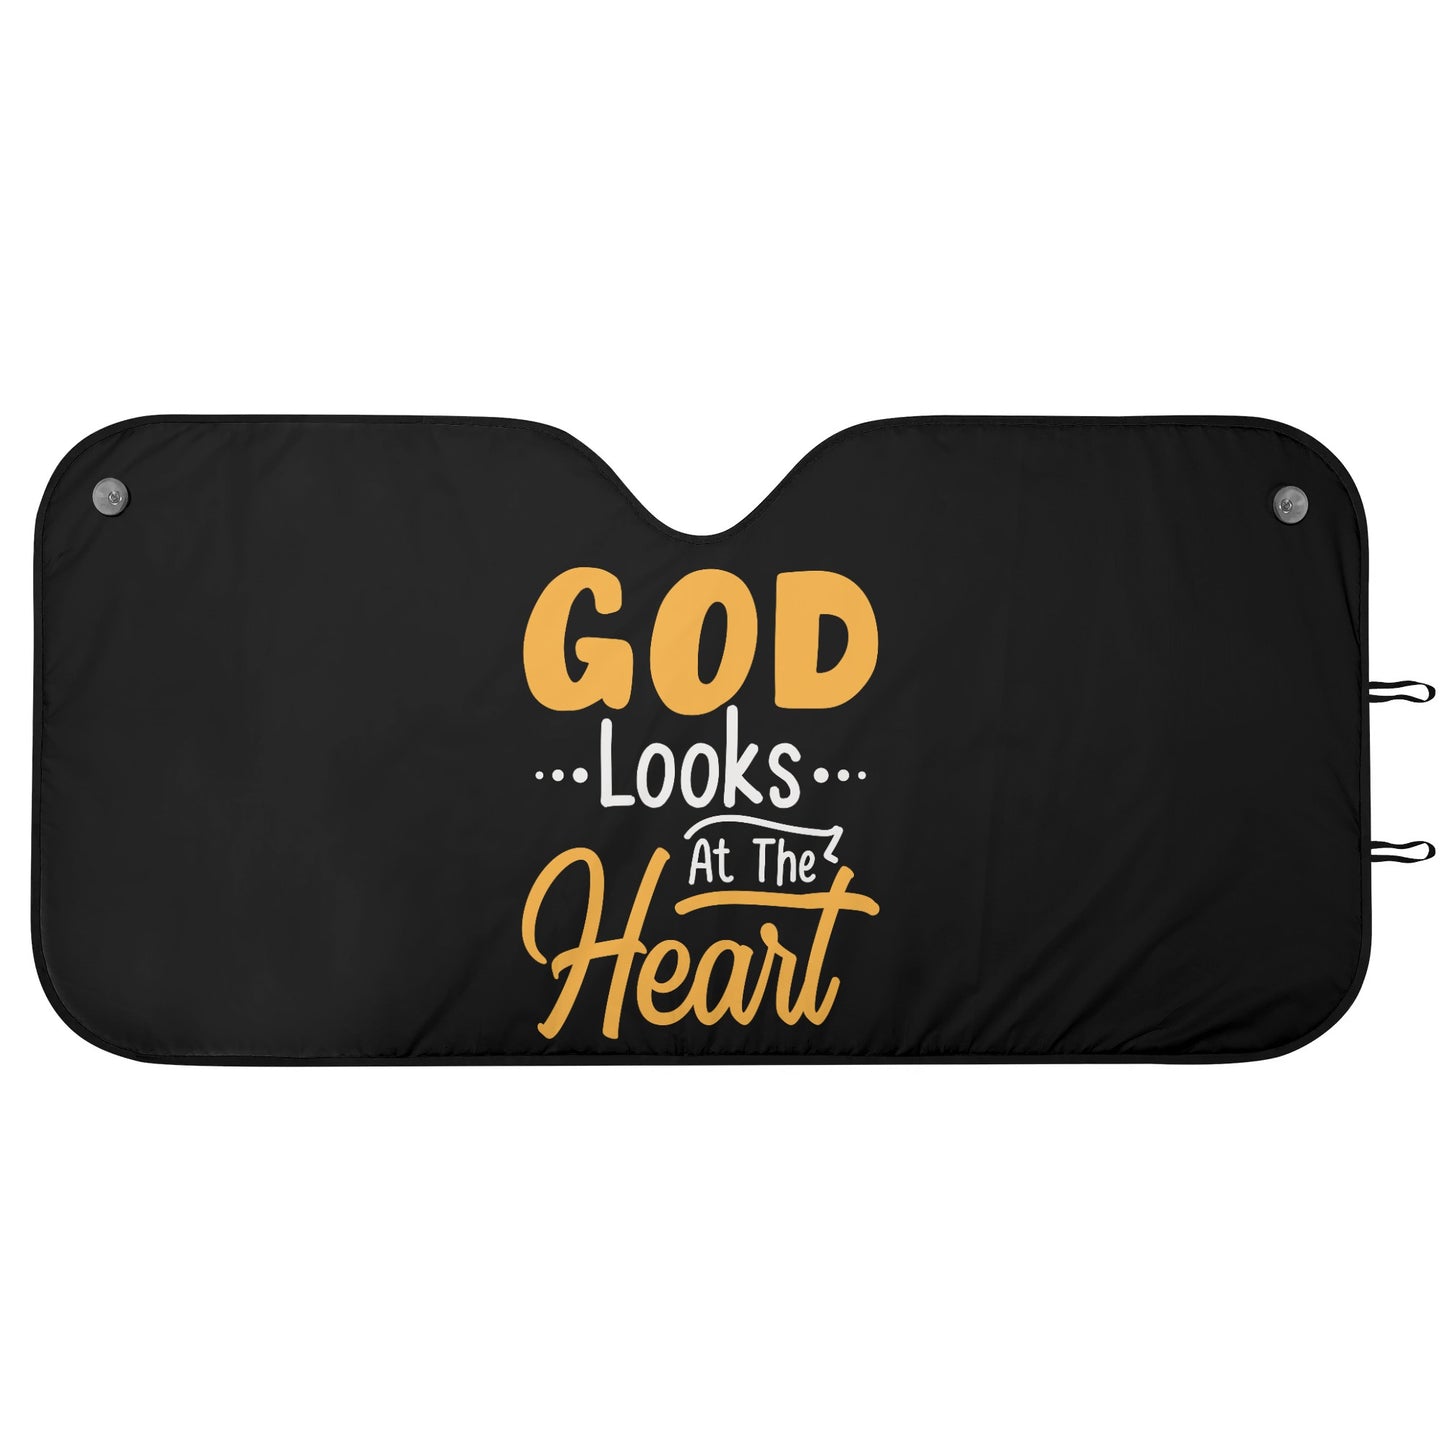 God Looks At The Heart Car Sunshade Christian Car Accessories popcustoms